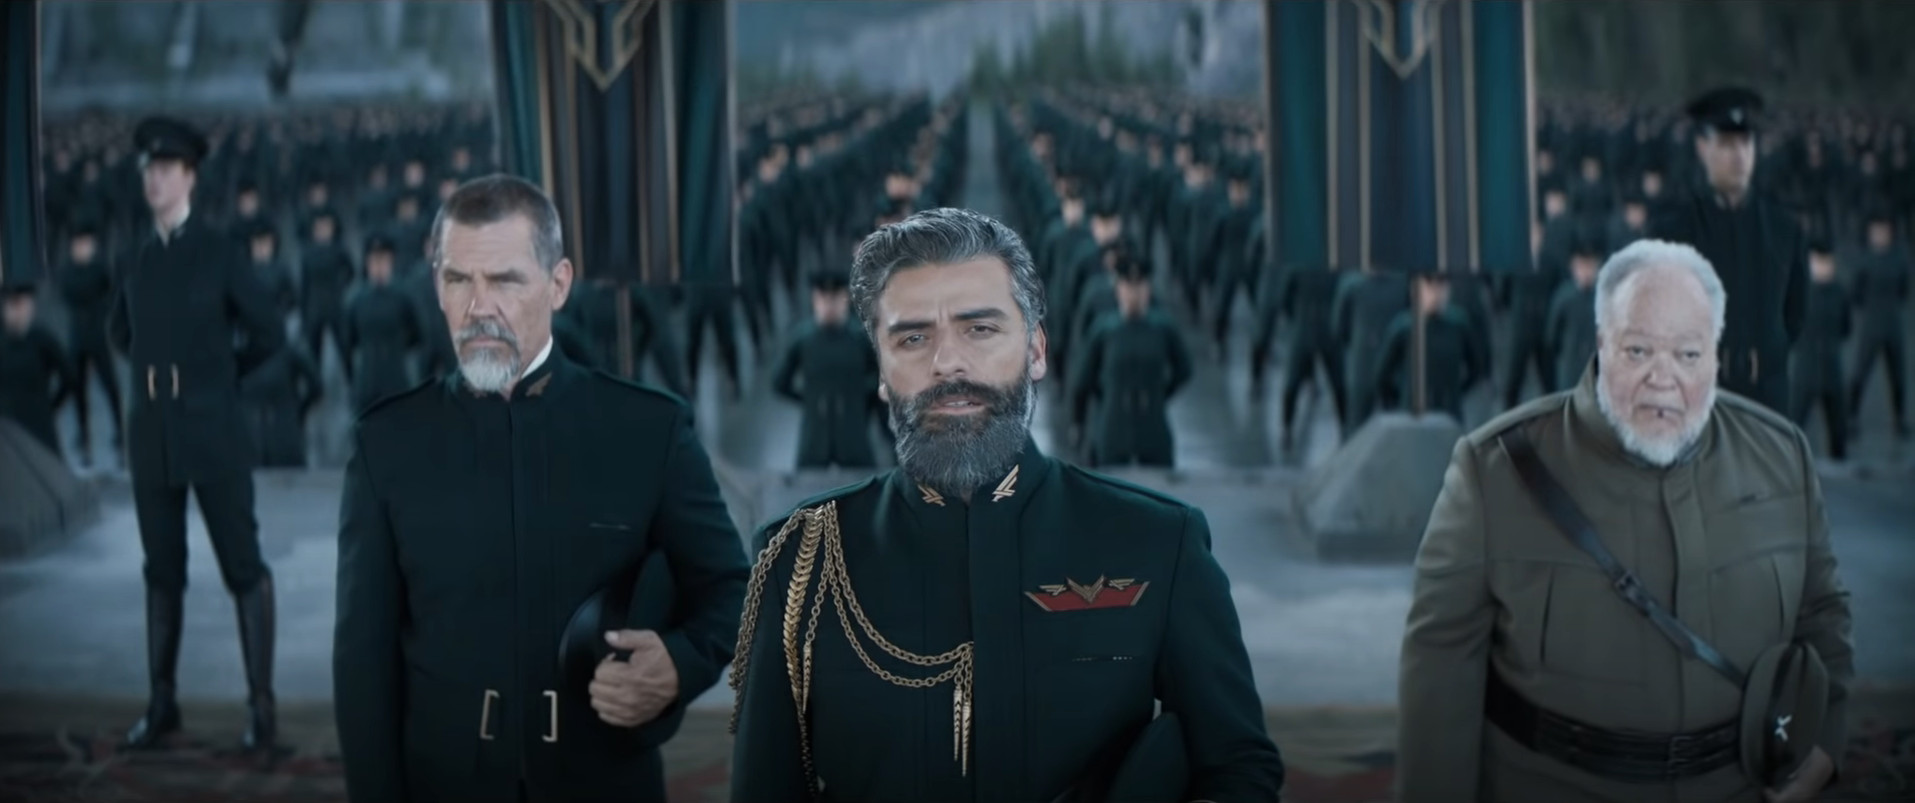 Gurney Halleck, Duke Leto, and Thufir Hawat in front of the Atreides troops